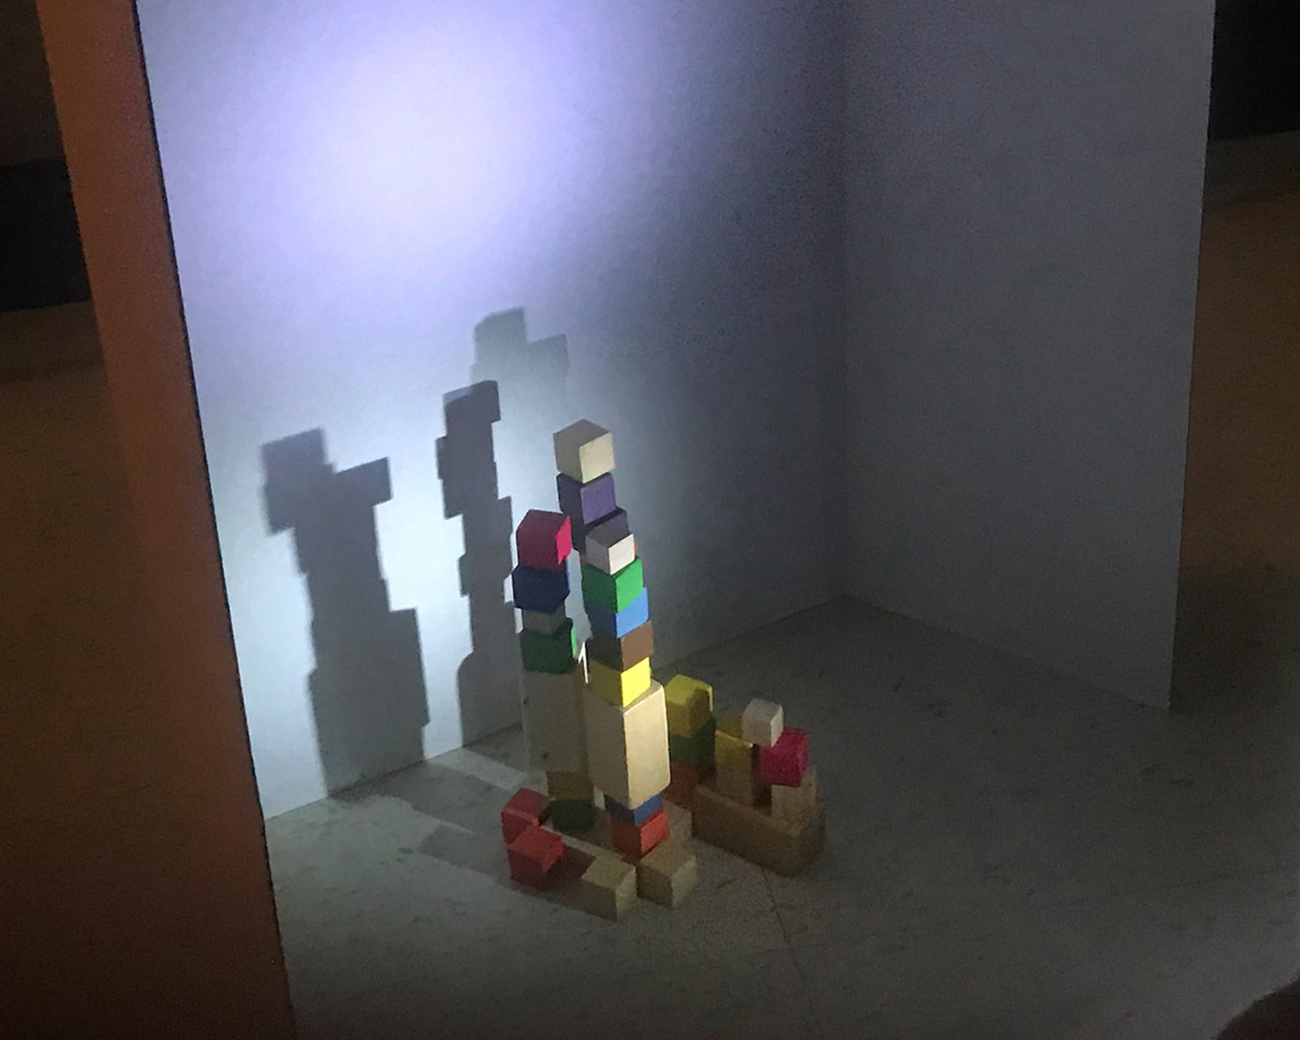 Exploring the shadows created by different-colored solid blocks.